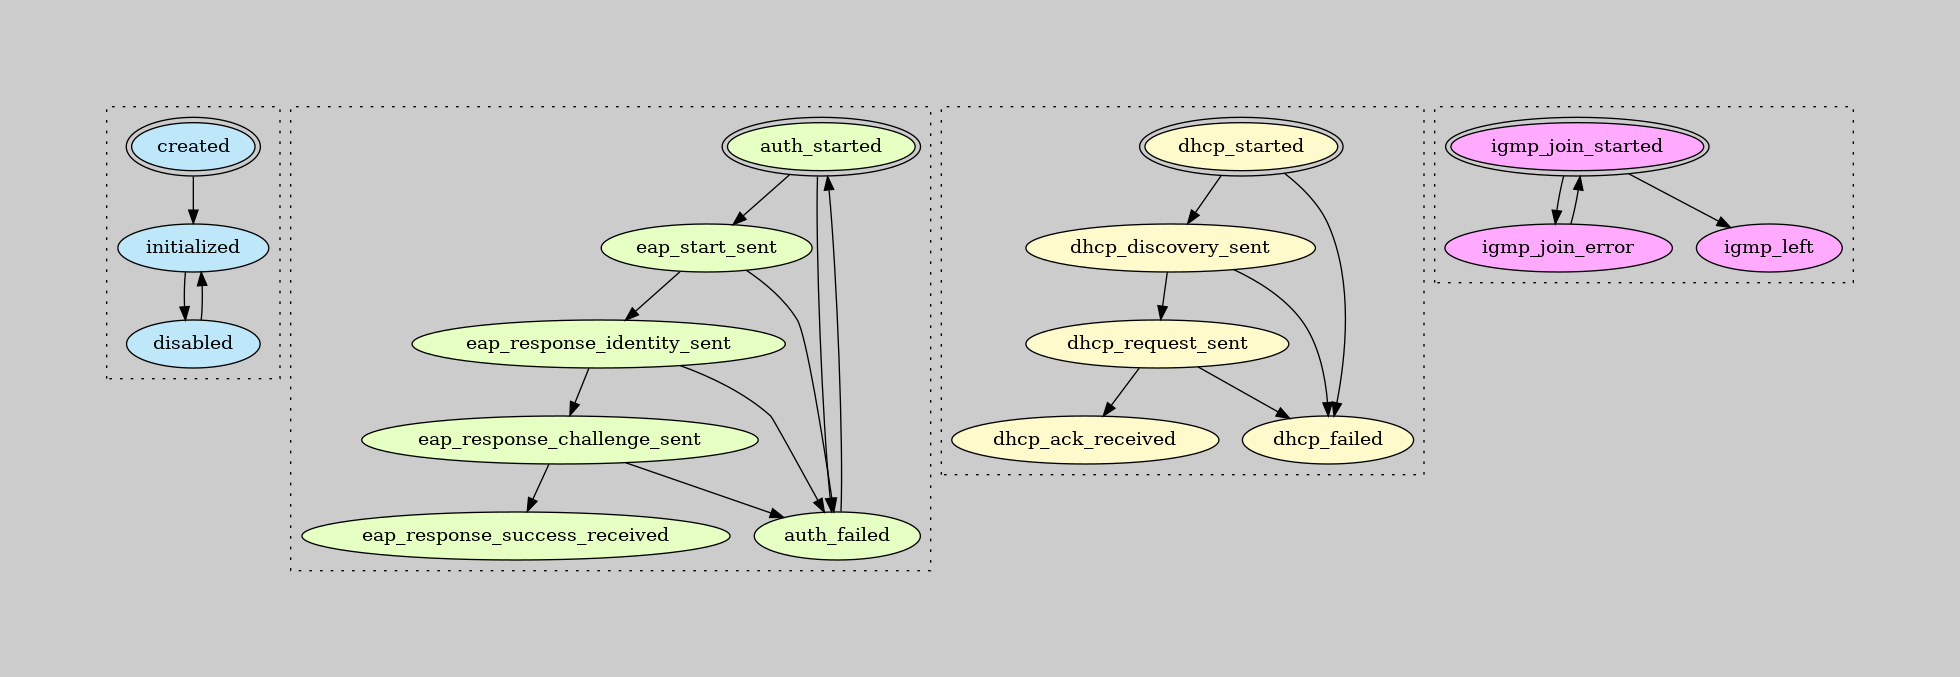 digraph {
    rankdir=TB
    newrank=true
    graph [pad="1,1" bgcolor="#cccccc"]
    node [style=filled]

    subgraph cluster_lifecycle {
        node [fillcolor="#bee7fa"]
        style=dotted

        created [peripheries=2]
        initialized
        disabled

        created -> initialized -> disabled
        disabled -> initialized
    }

    subgraph cluster_eapol {
        style=rounded
        style=dotted
        node [fillcolor="#e6ffc2"]

        auth_started [peripheries=2]
        eap_start_sent
        eap_response_identity_sent
        eap_response_challenge_sent
        {
            rank=same
            eap_response_success_received
            auth_failed
        }

        auth_started -> eap_start_sent -> eap_response_identity_sent -> eap_response_challenge_sent -> eap_response_success_received
        auth_started -> auth_failed
        eap_start_sent -> auth_failed
        eap_response_identity_sent -> auth_failed
        eap_response_challenge_sent -> auth_failed

        auth_failed -> auth_started
    }

    subgraph cluster_dhcp {
        node [fillcolor="#fffacc"]
        style=rounded
        style=dotted

        dhcp_started [peripheries=2]
        dhcp_discovery_sent
        dhcp_request_sent
        {
            rank=same
            dhcp_ack_received
            dhcp_failed
        }

        dhcp_started -> dhcp_discovery_sent -> dhcp_request_sent -> dhcp_ack_received
        dhcp_started -> dhcp_failed
        dhcp_discovery_sent -> dhcp_failed
        dhcp_request_sent -> dhcp_failed
        dhcp_ack_received dhcp_failed

    }

    subgraph cluster_igmp {
        node [fillcolor="#ffaaff"]
        style=rounded
        style=dotted

        igmp_join_started [peripheries=2]
        igmp_join_started -> igmp_join_error -> igmp_join_started
        igmp_join_started -> igmp_left
    }
}